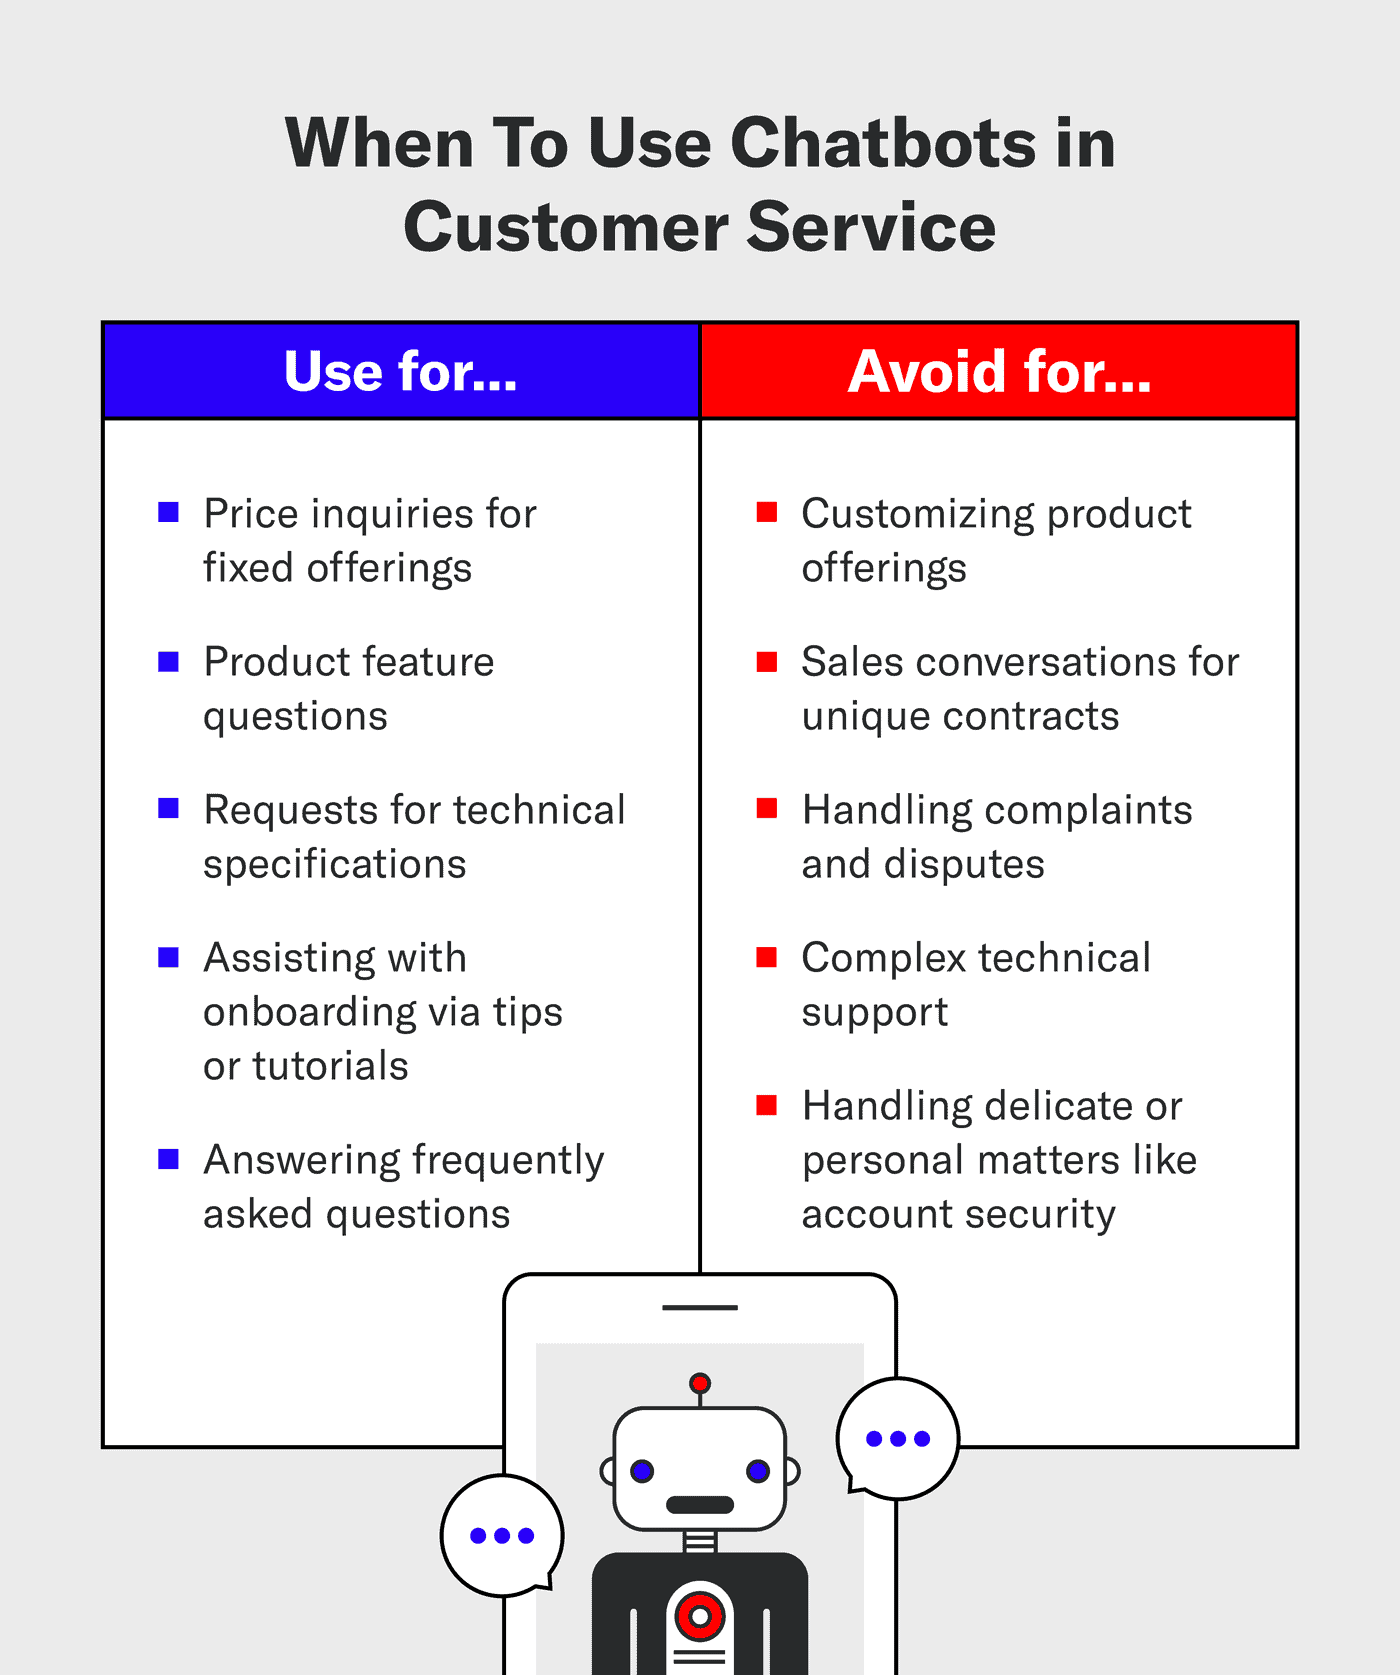 When to use chatbots in customer service